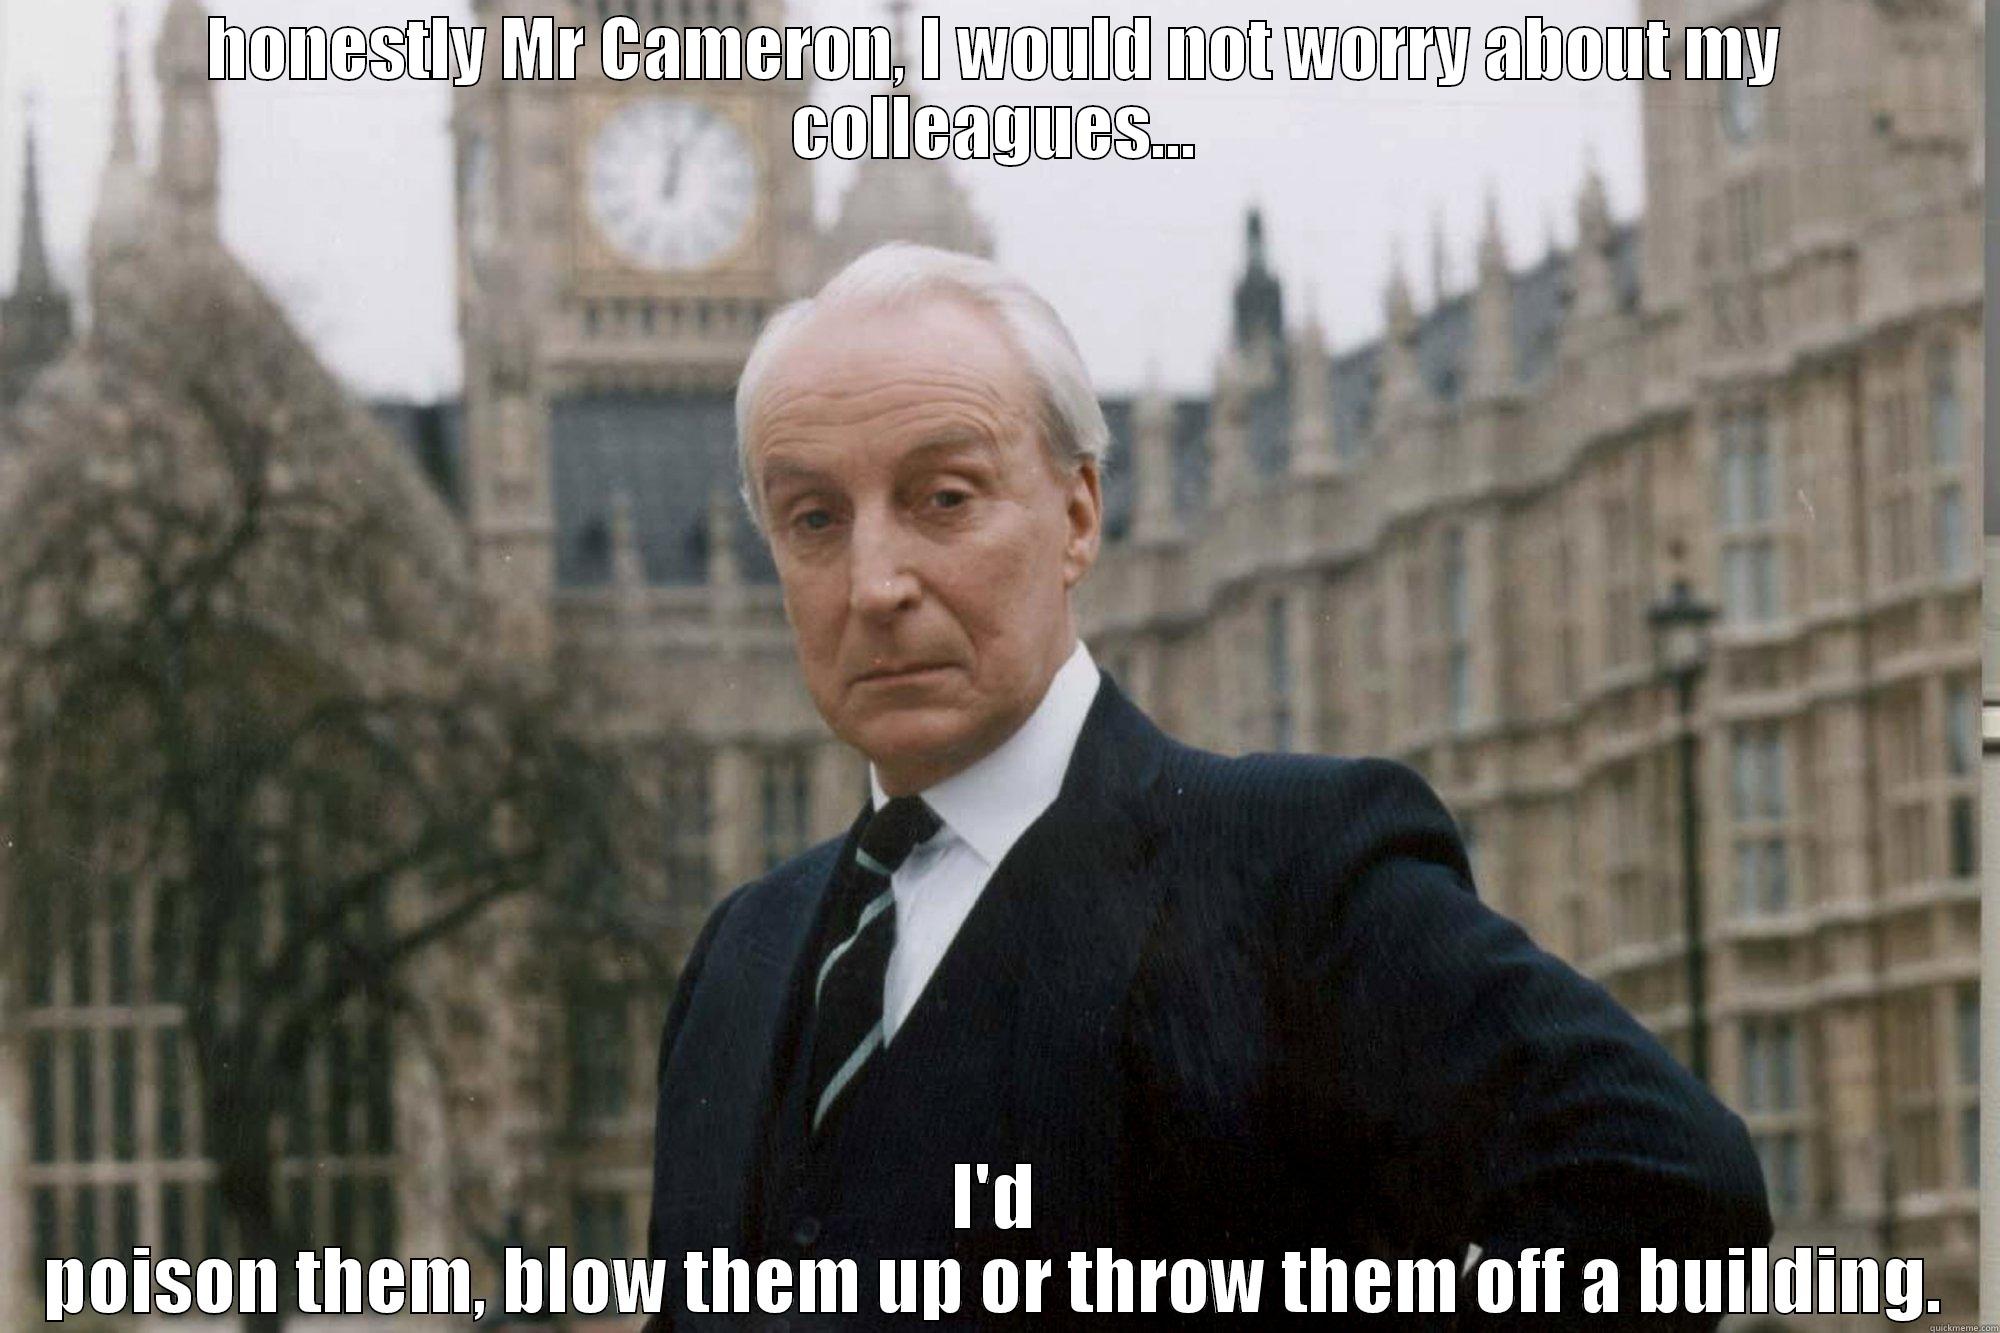 current affairs - HONESTLY MR CAMERON, I WOULD NOT WORRY ABOUT MY COLLEAGUES... I'D POISON THEM, BLOW THEM UP OR THROW THEM OFF A BUILDING. Misc